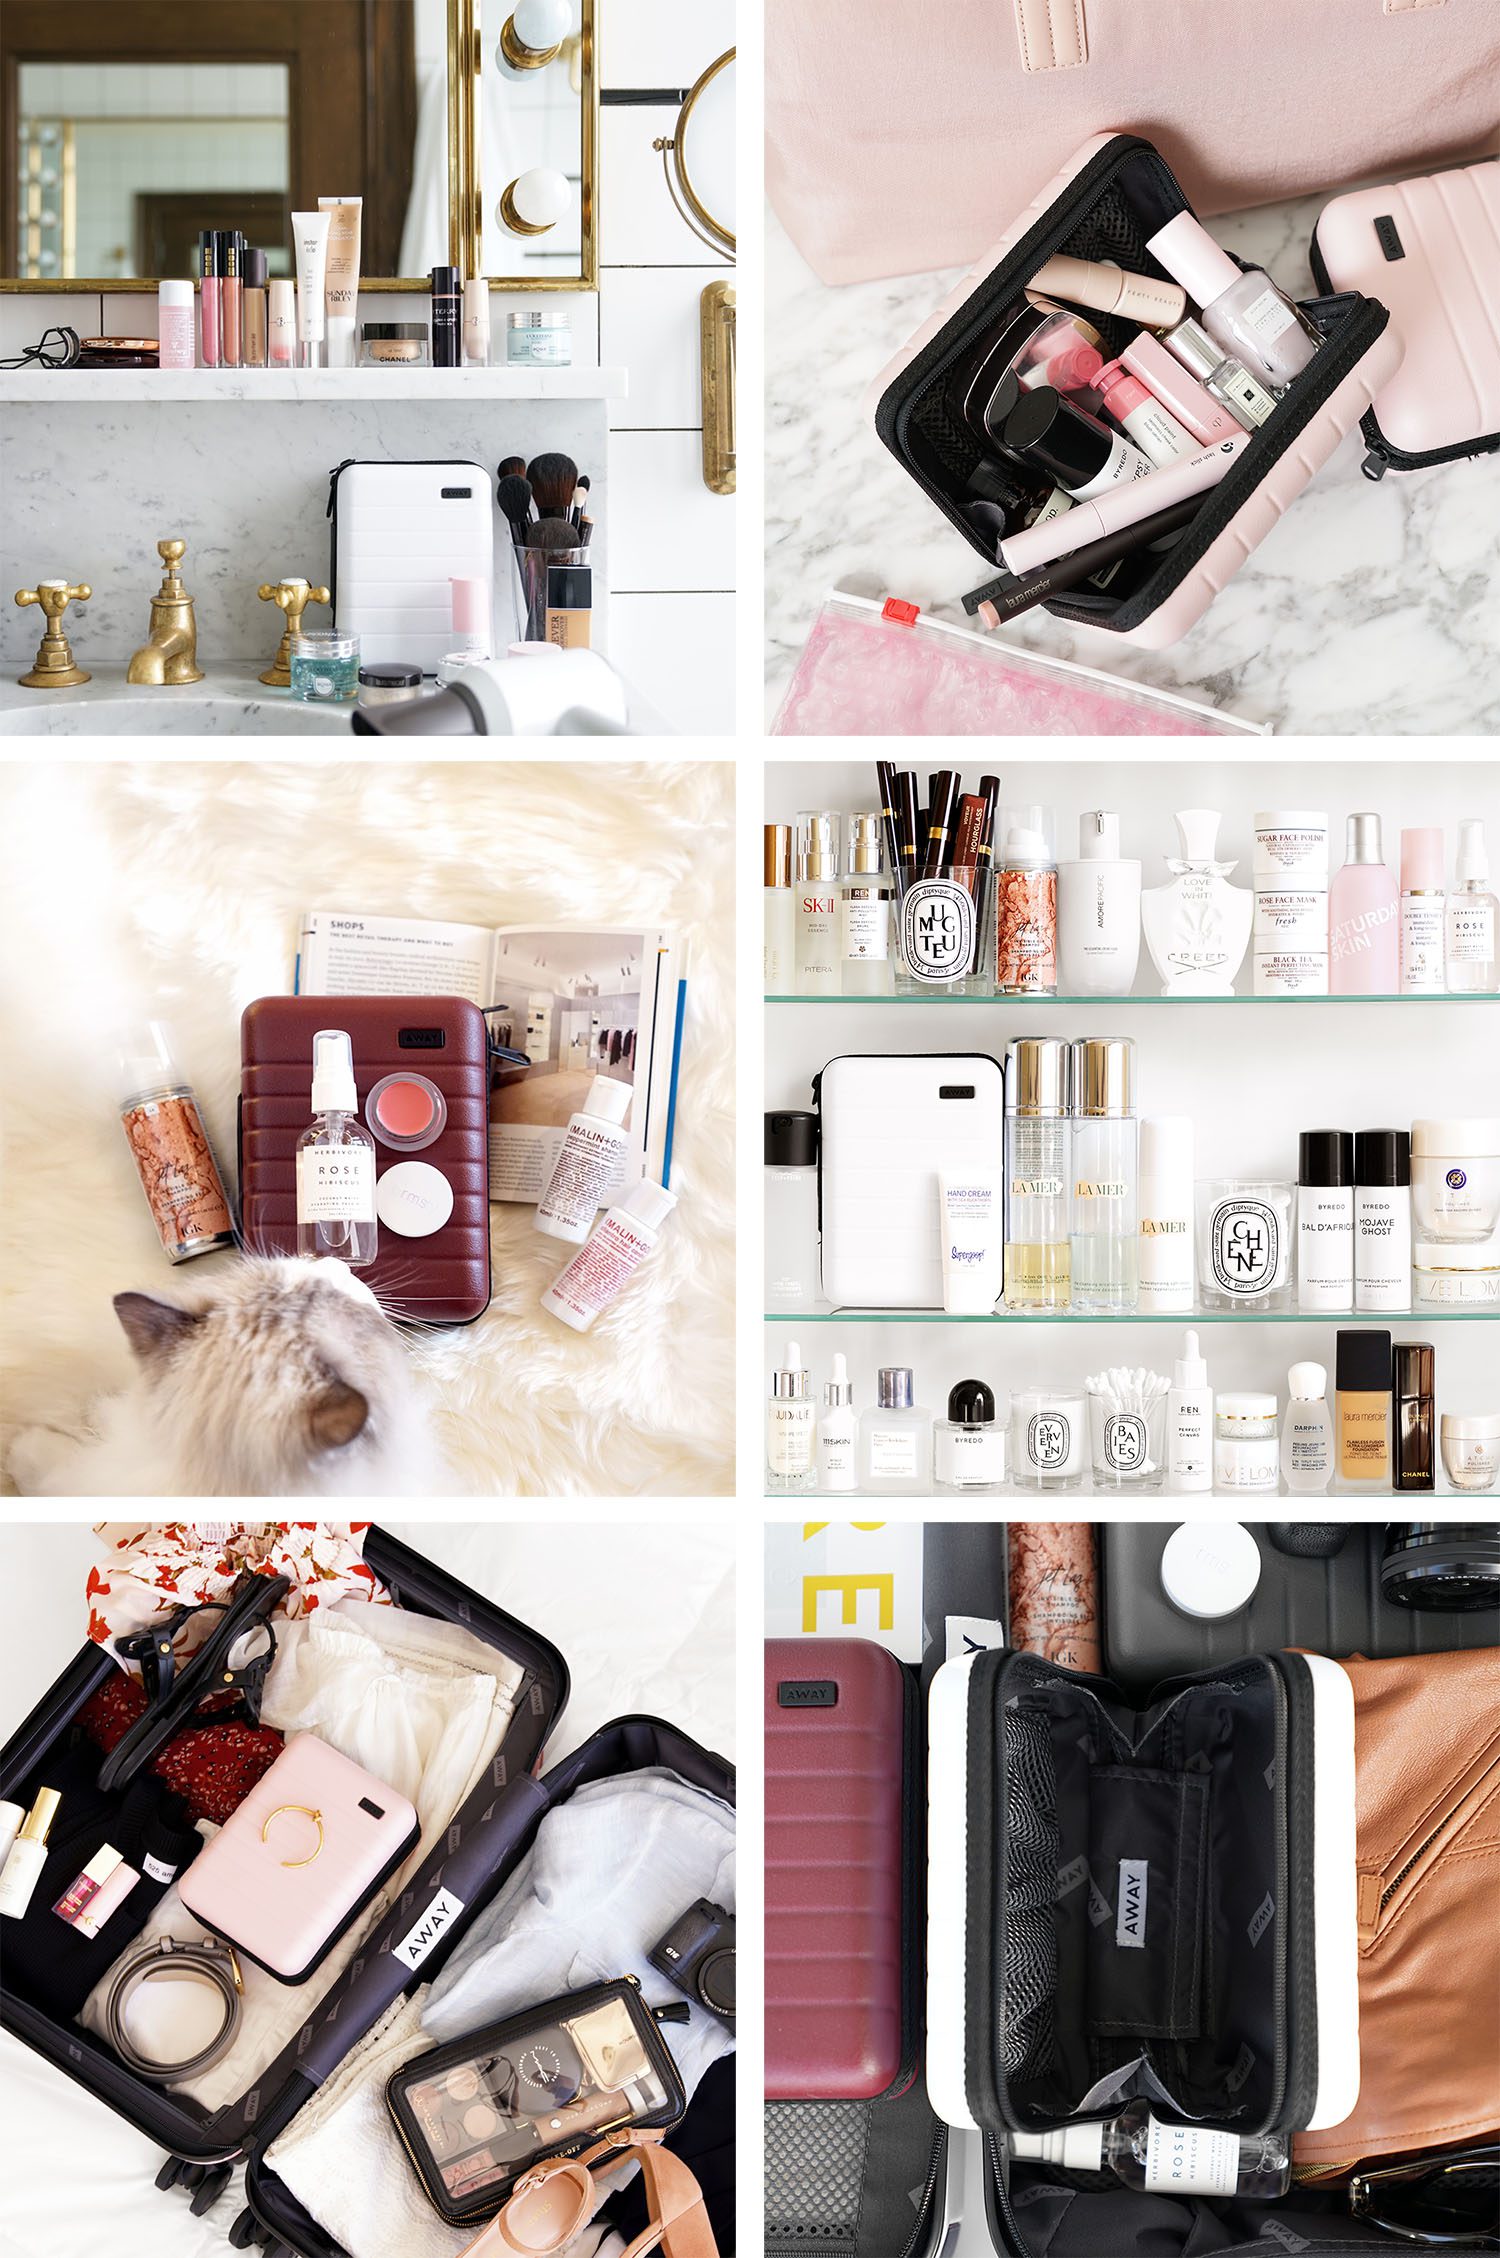 Away Travel Mini Cases Are Back! - The Beauty Look Book